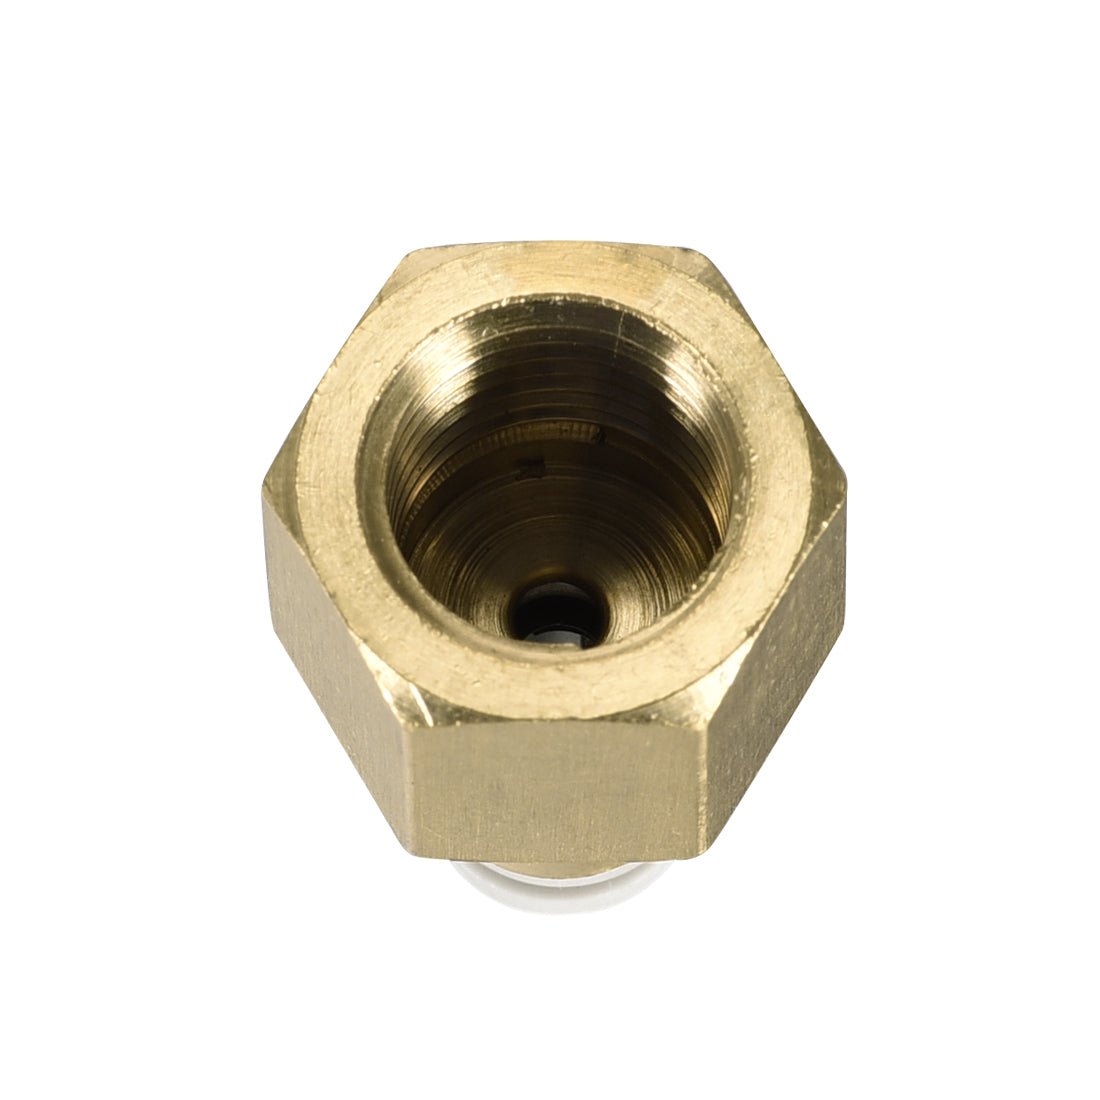 uxcell Uxcell Push to Connect Tube Fittings 4mm Tube OD x 1/4 PT Female Golden Tone